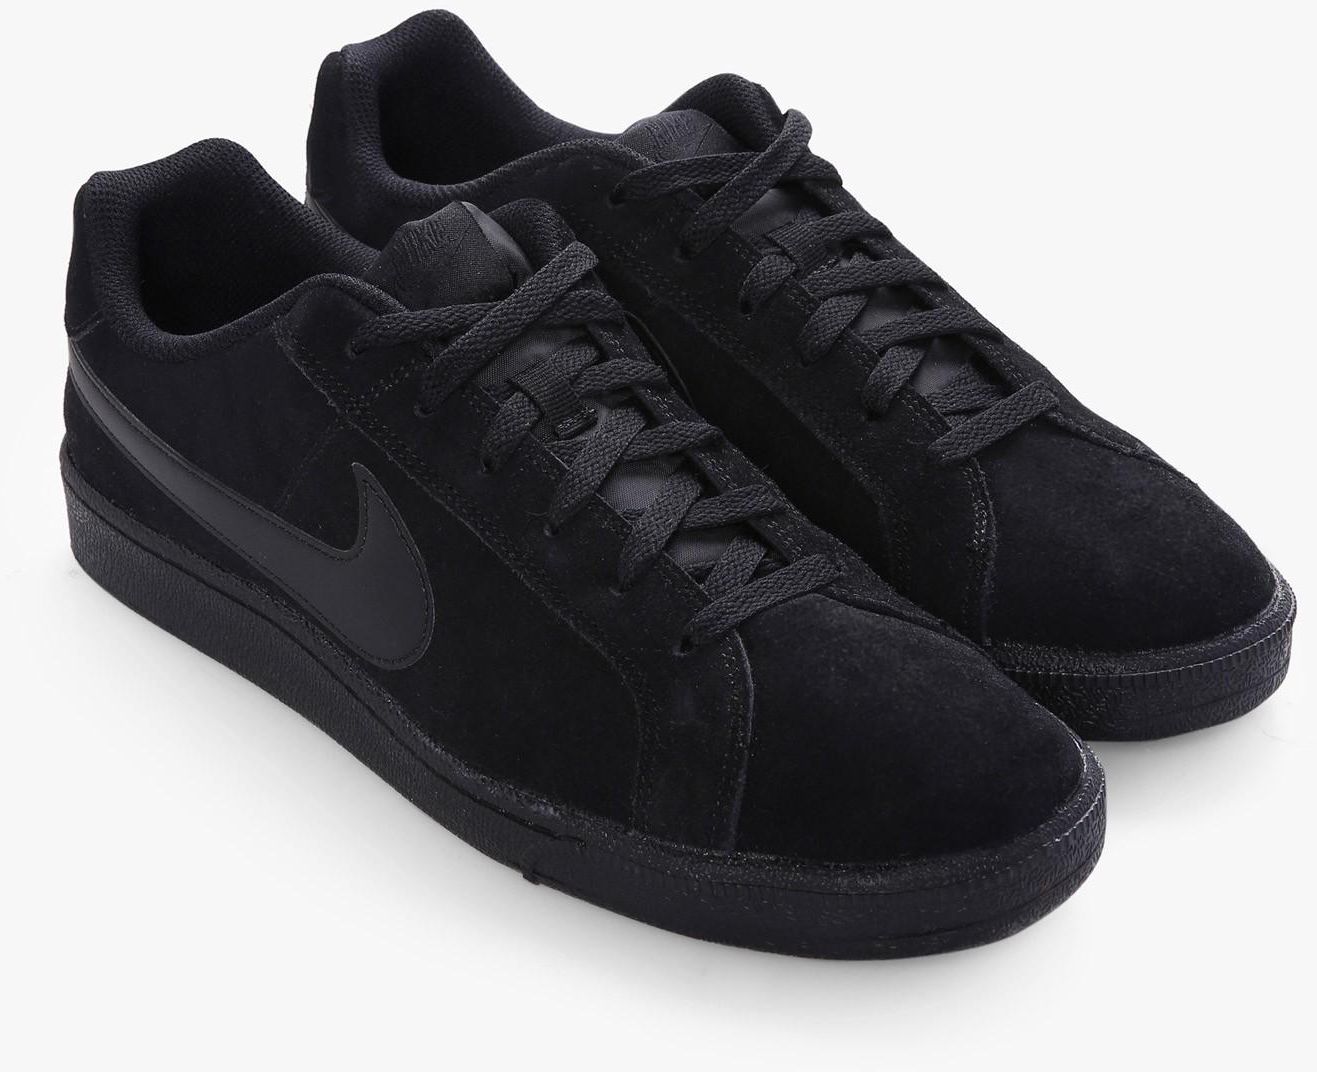 Black Court Royale Sneakers